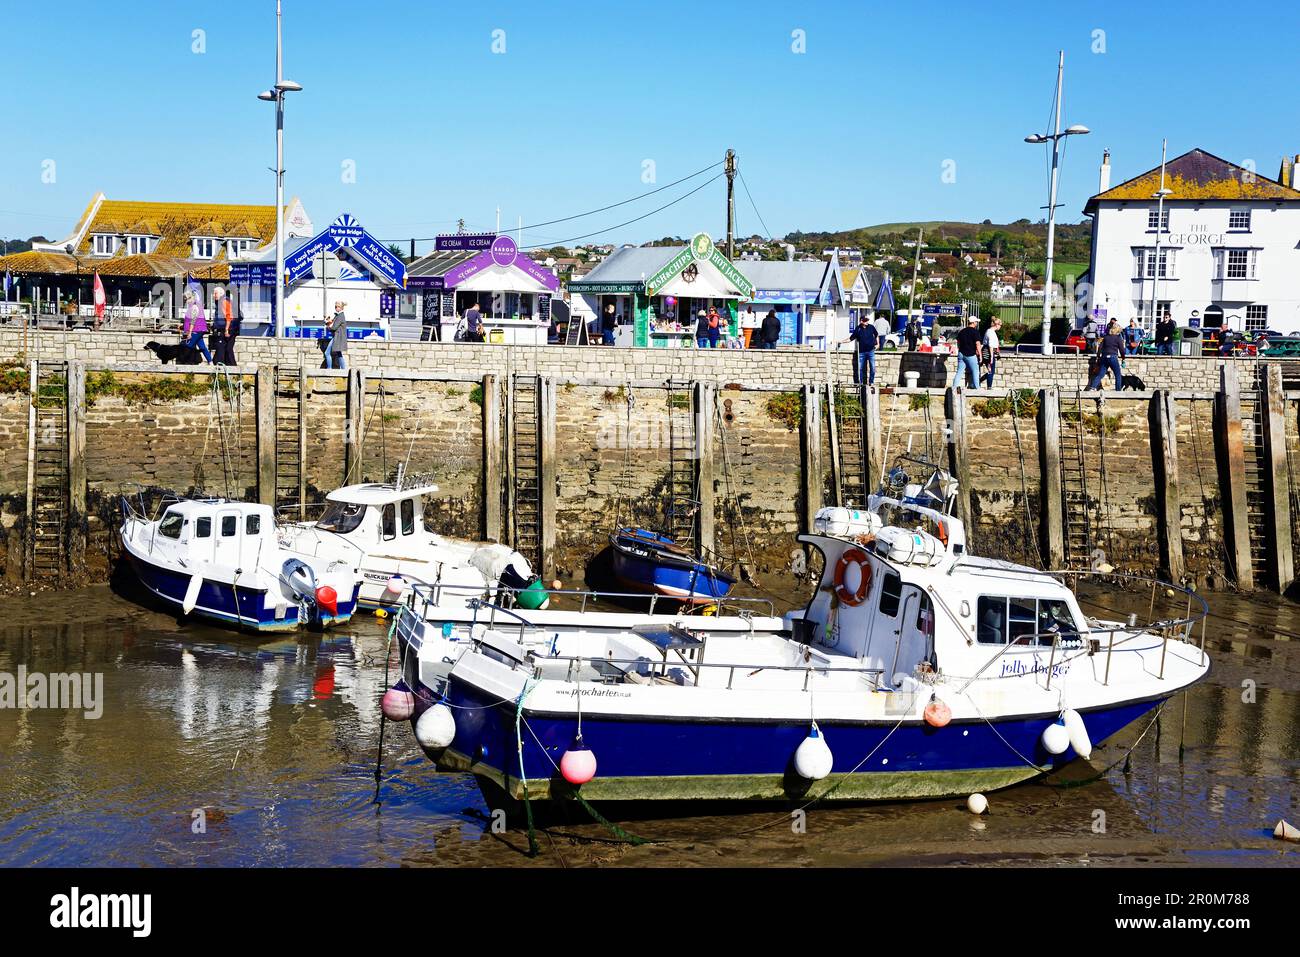 View of traditional fishing boats moored in the harbour at low tide with town buildings to the rear, West Bay, Dorset, UK. Stock Photo